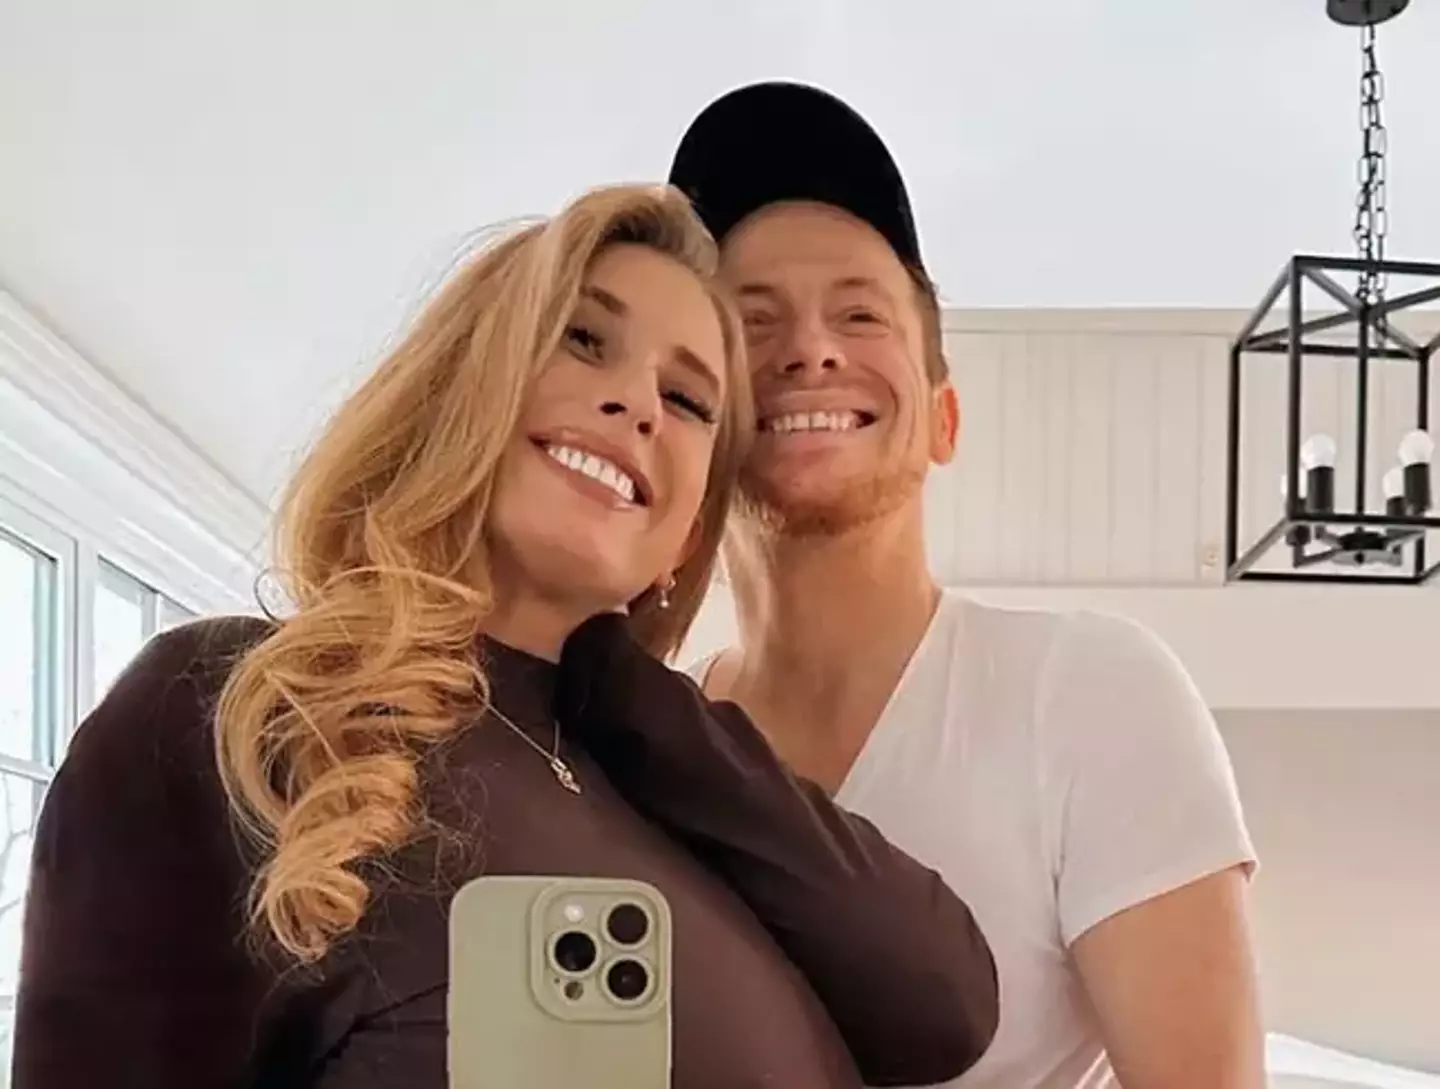 Stacey Solomon and Joe Swash have been together since 2016 and recently celebrated their one year wedding anniversary.